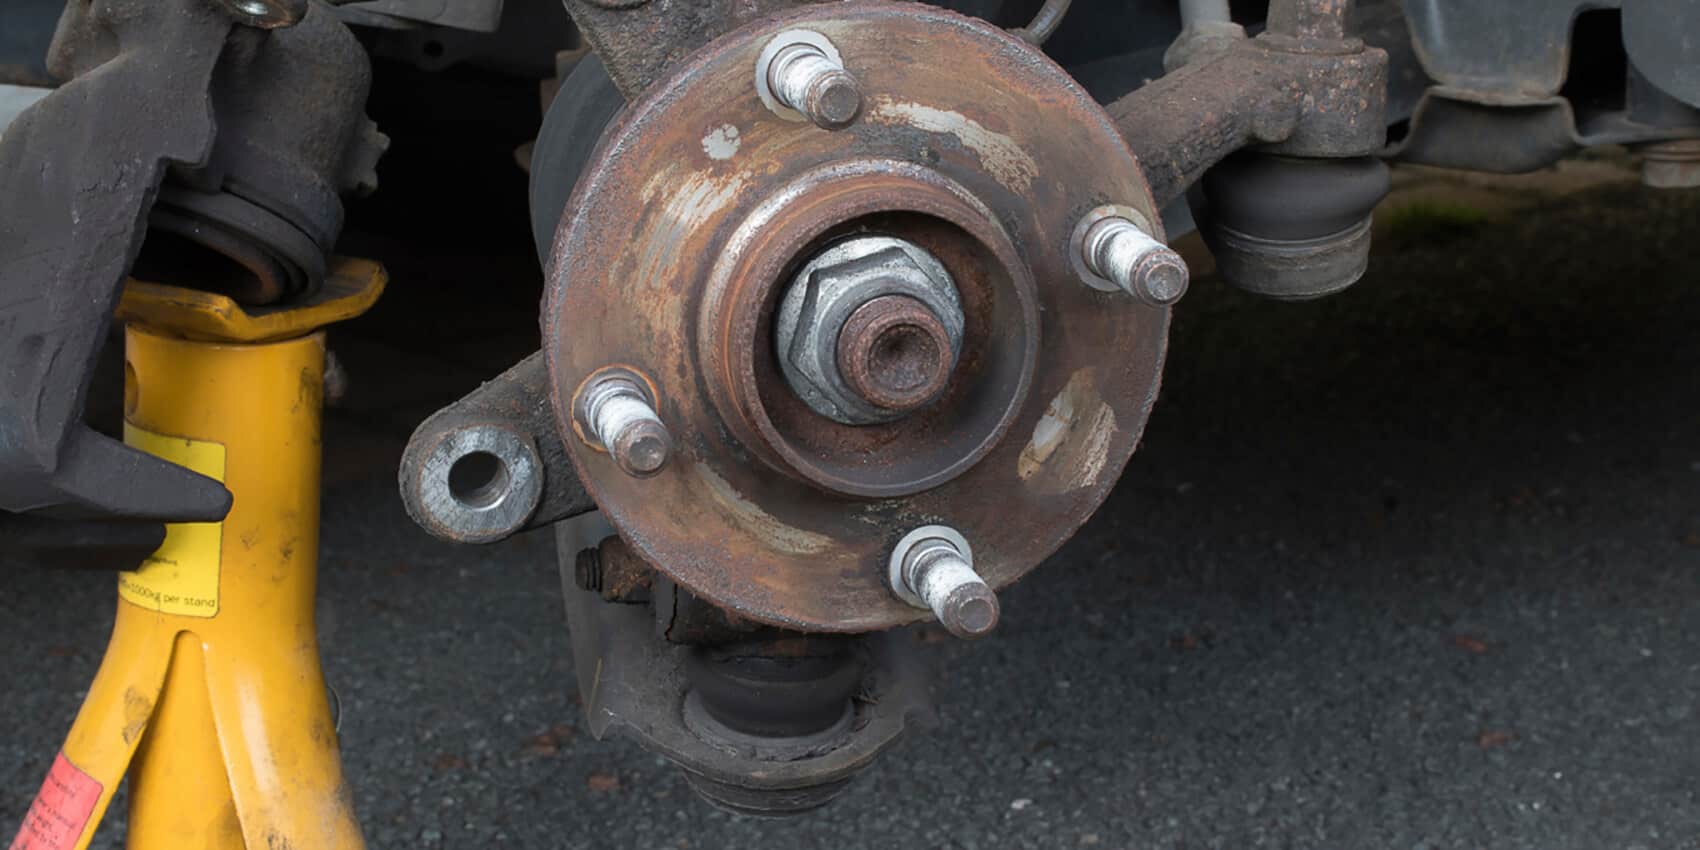 Tackling the Unexpected: What to Do When Your Wheel Bearing Fails on the Road